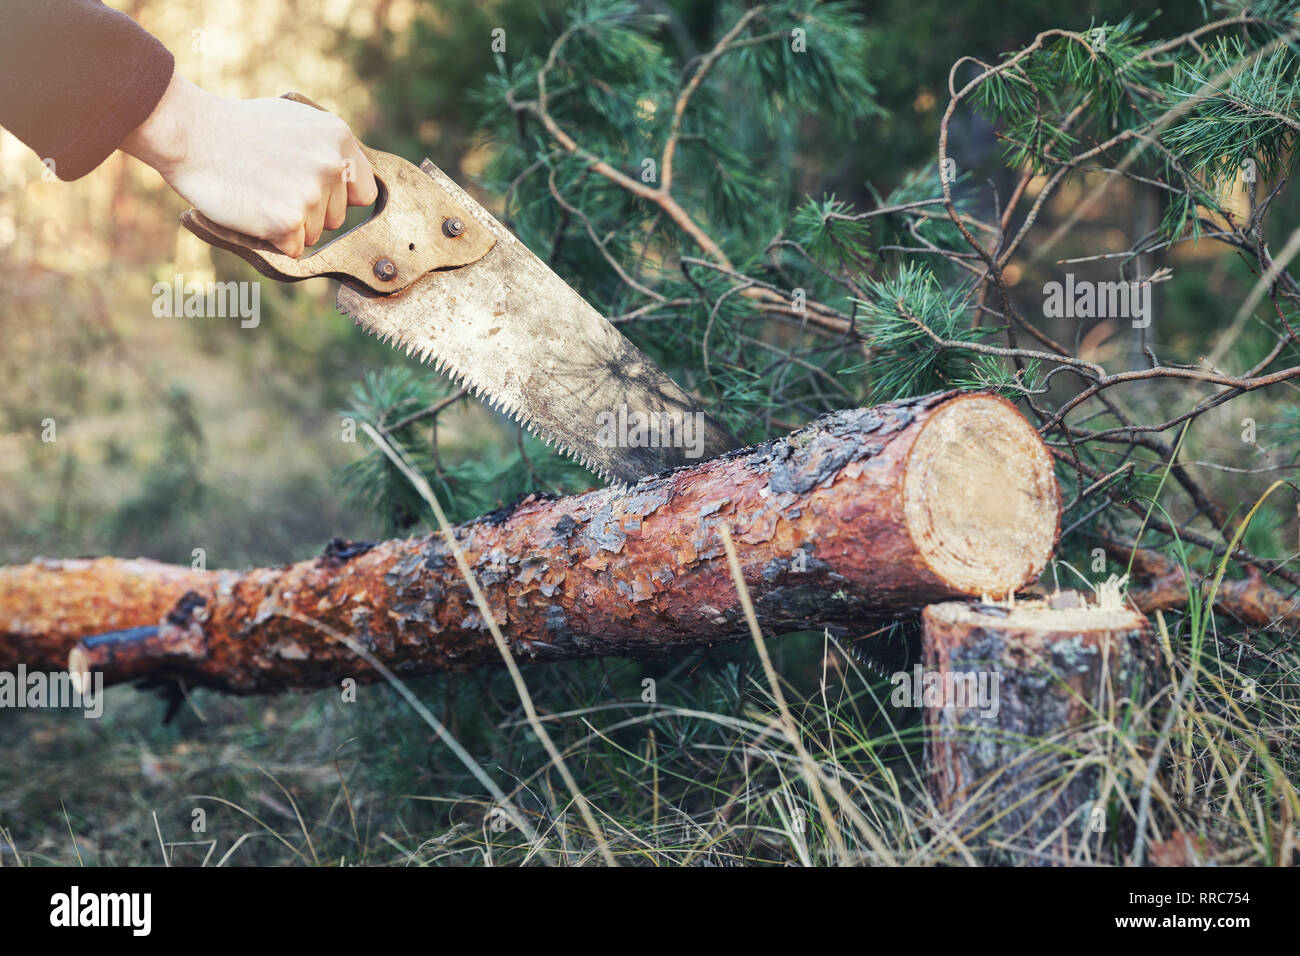 lumberjack cutting tree trunk with hand saw in forest Stock Photo